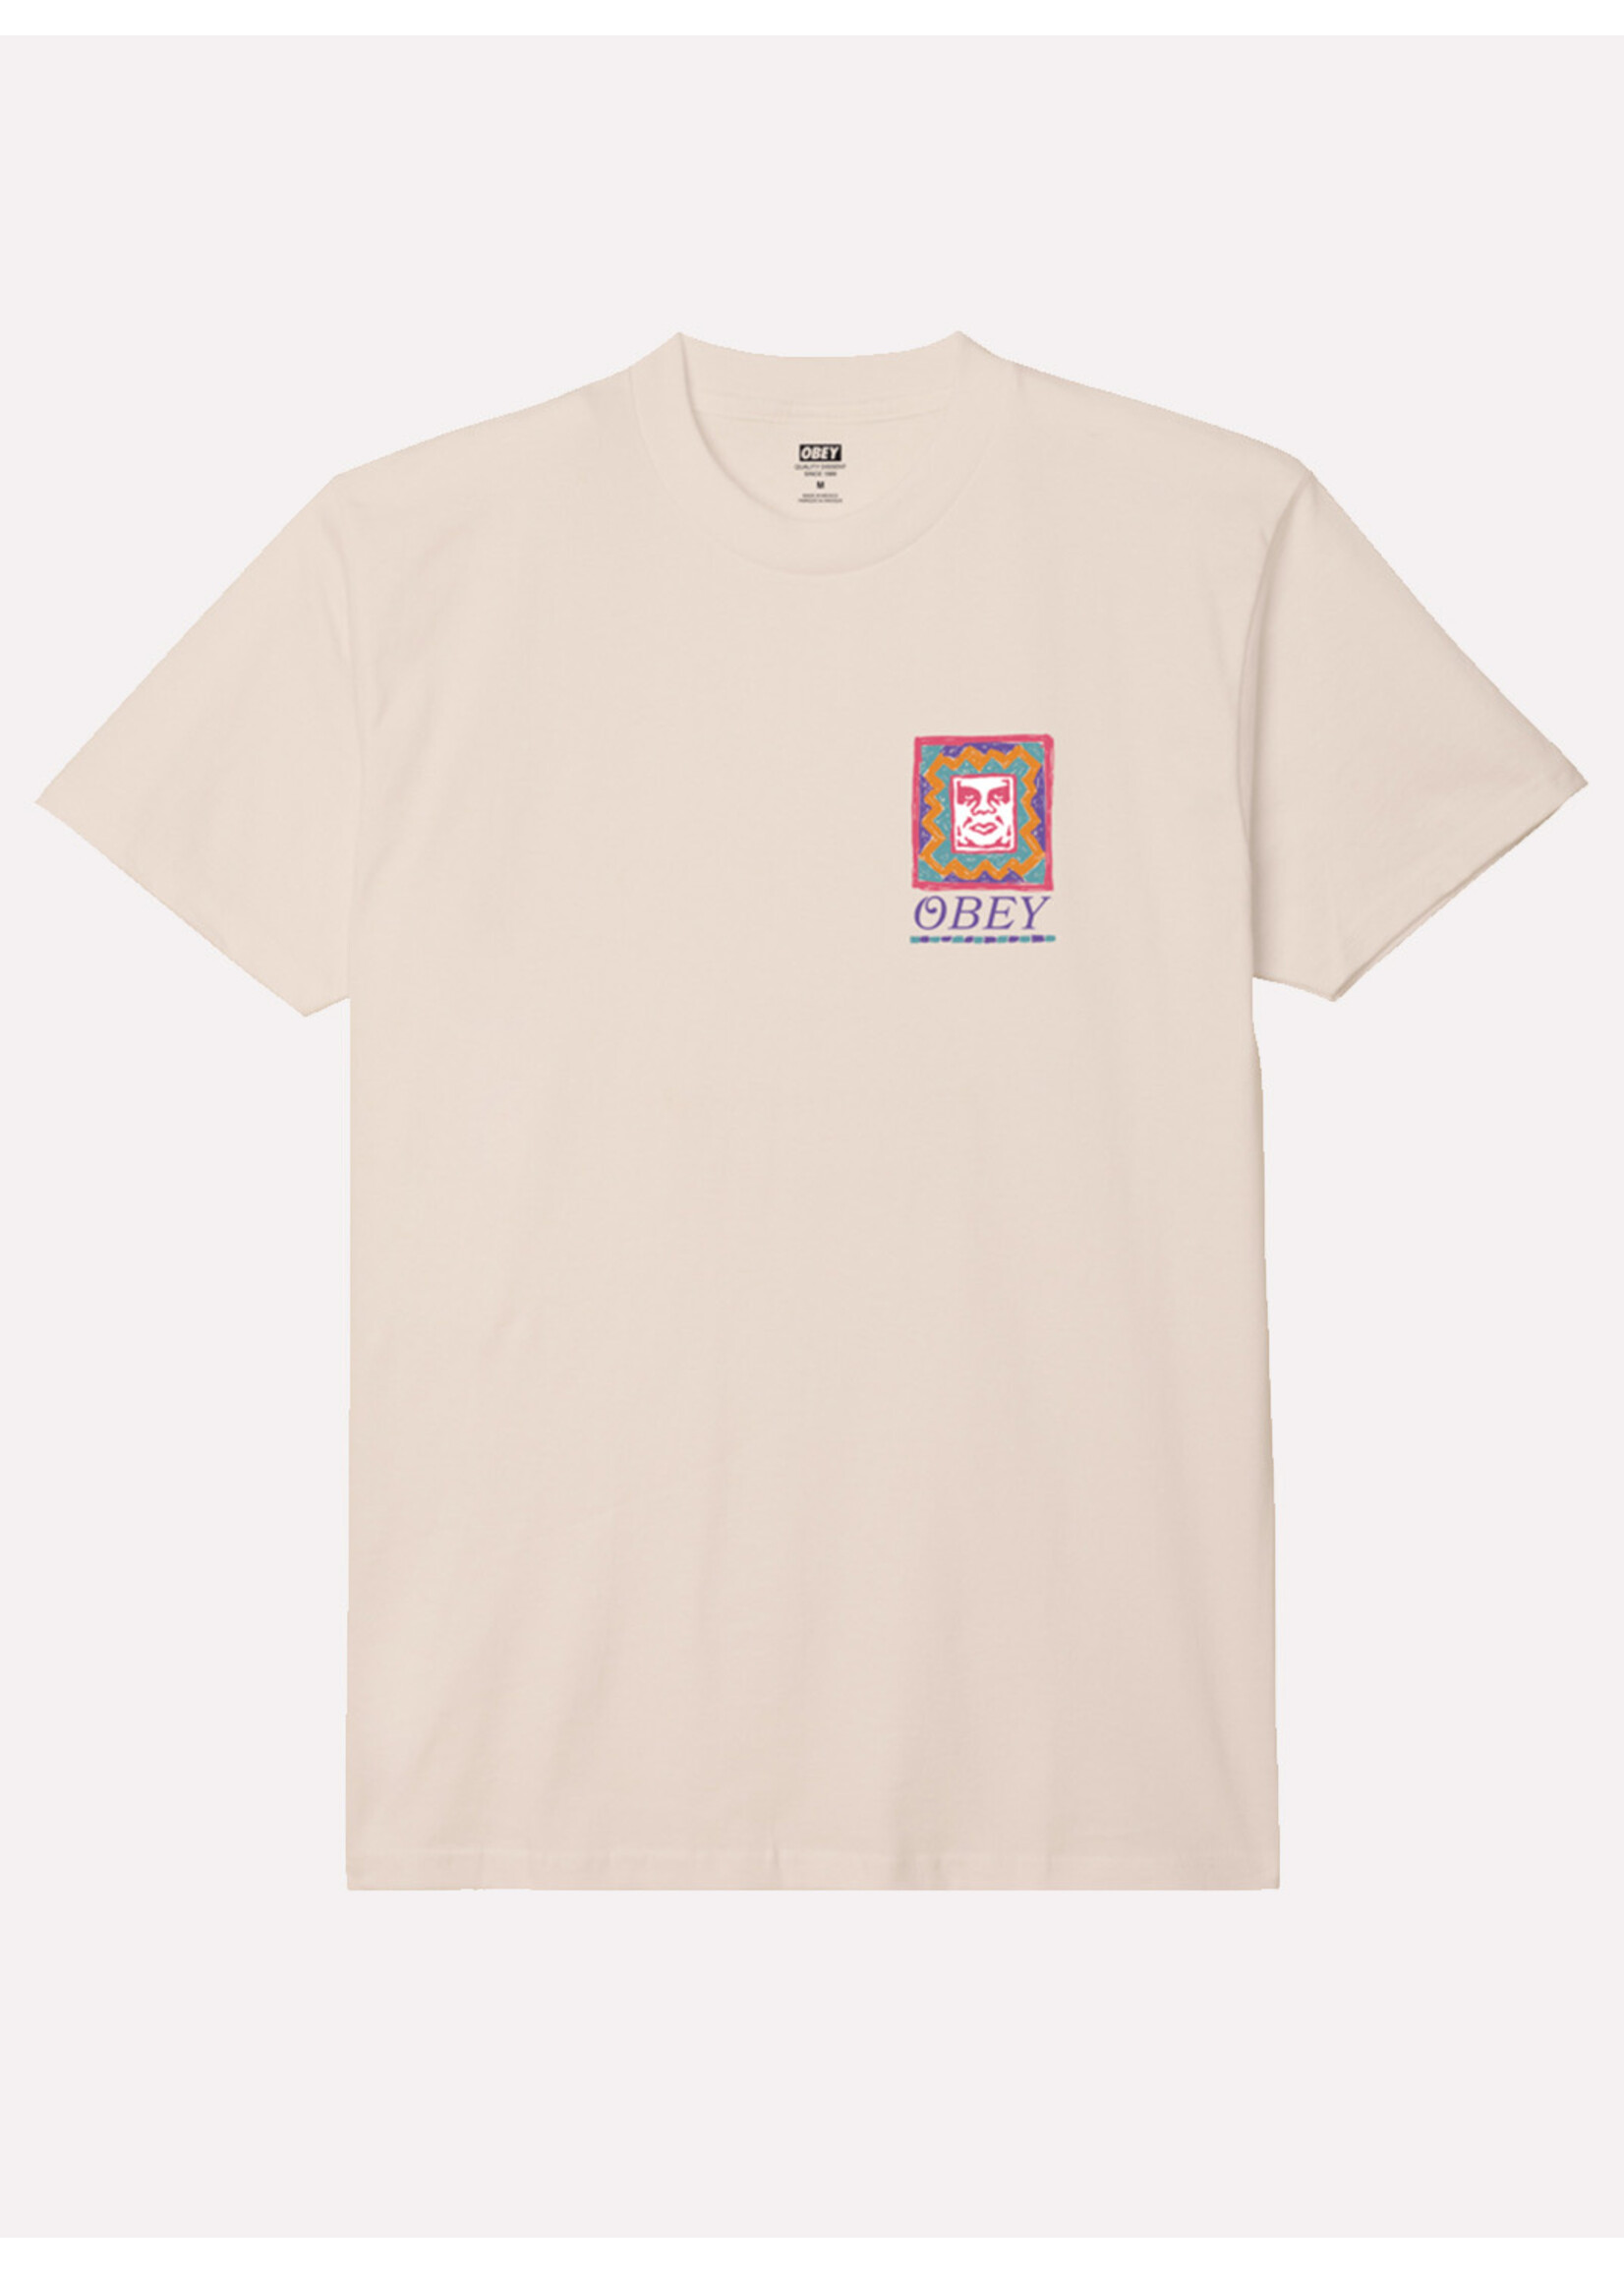 Obey Obey Throwback Tee Cream 165263786-CRM